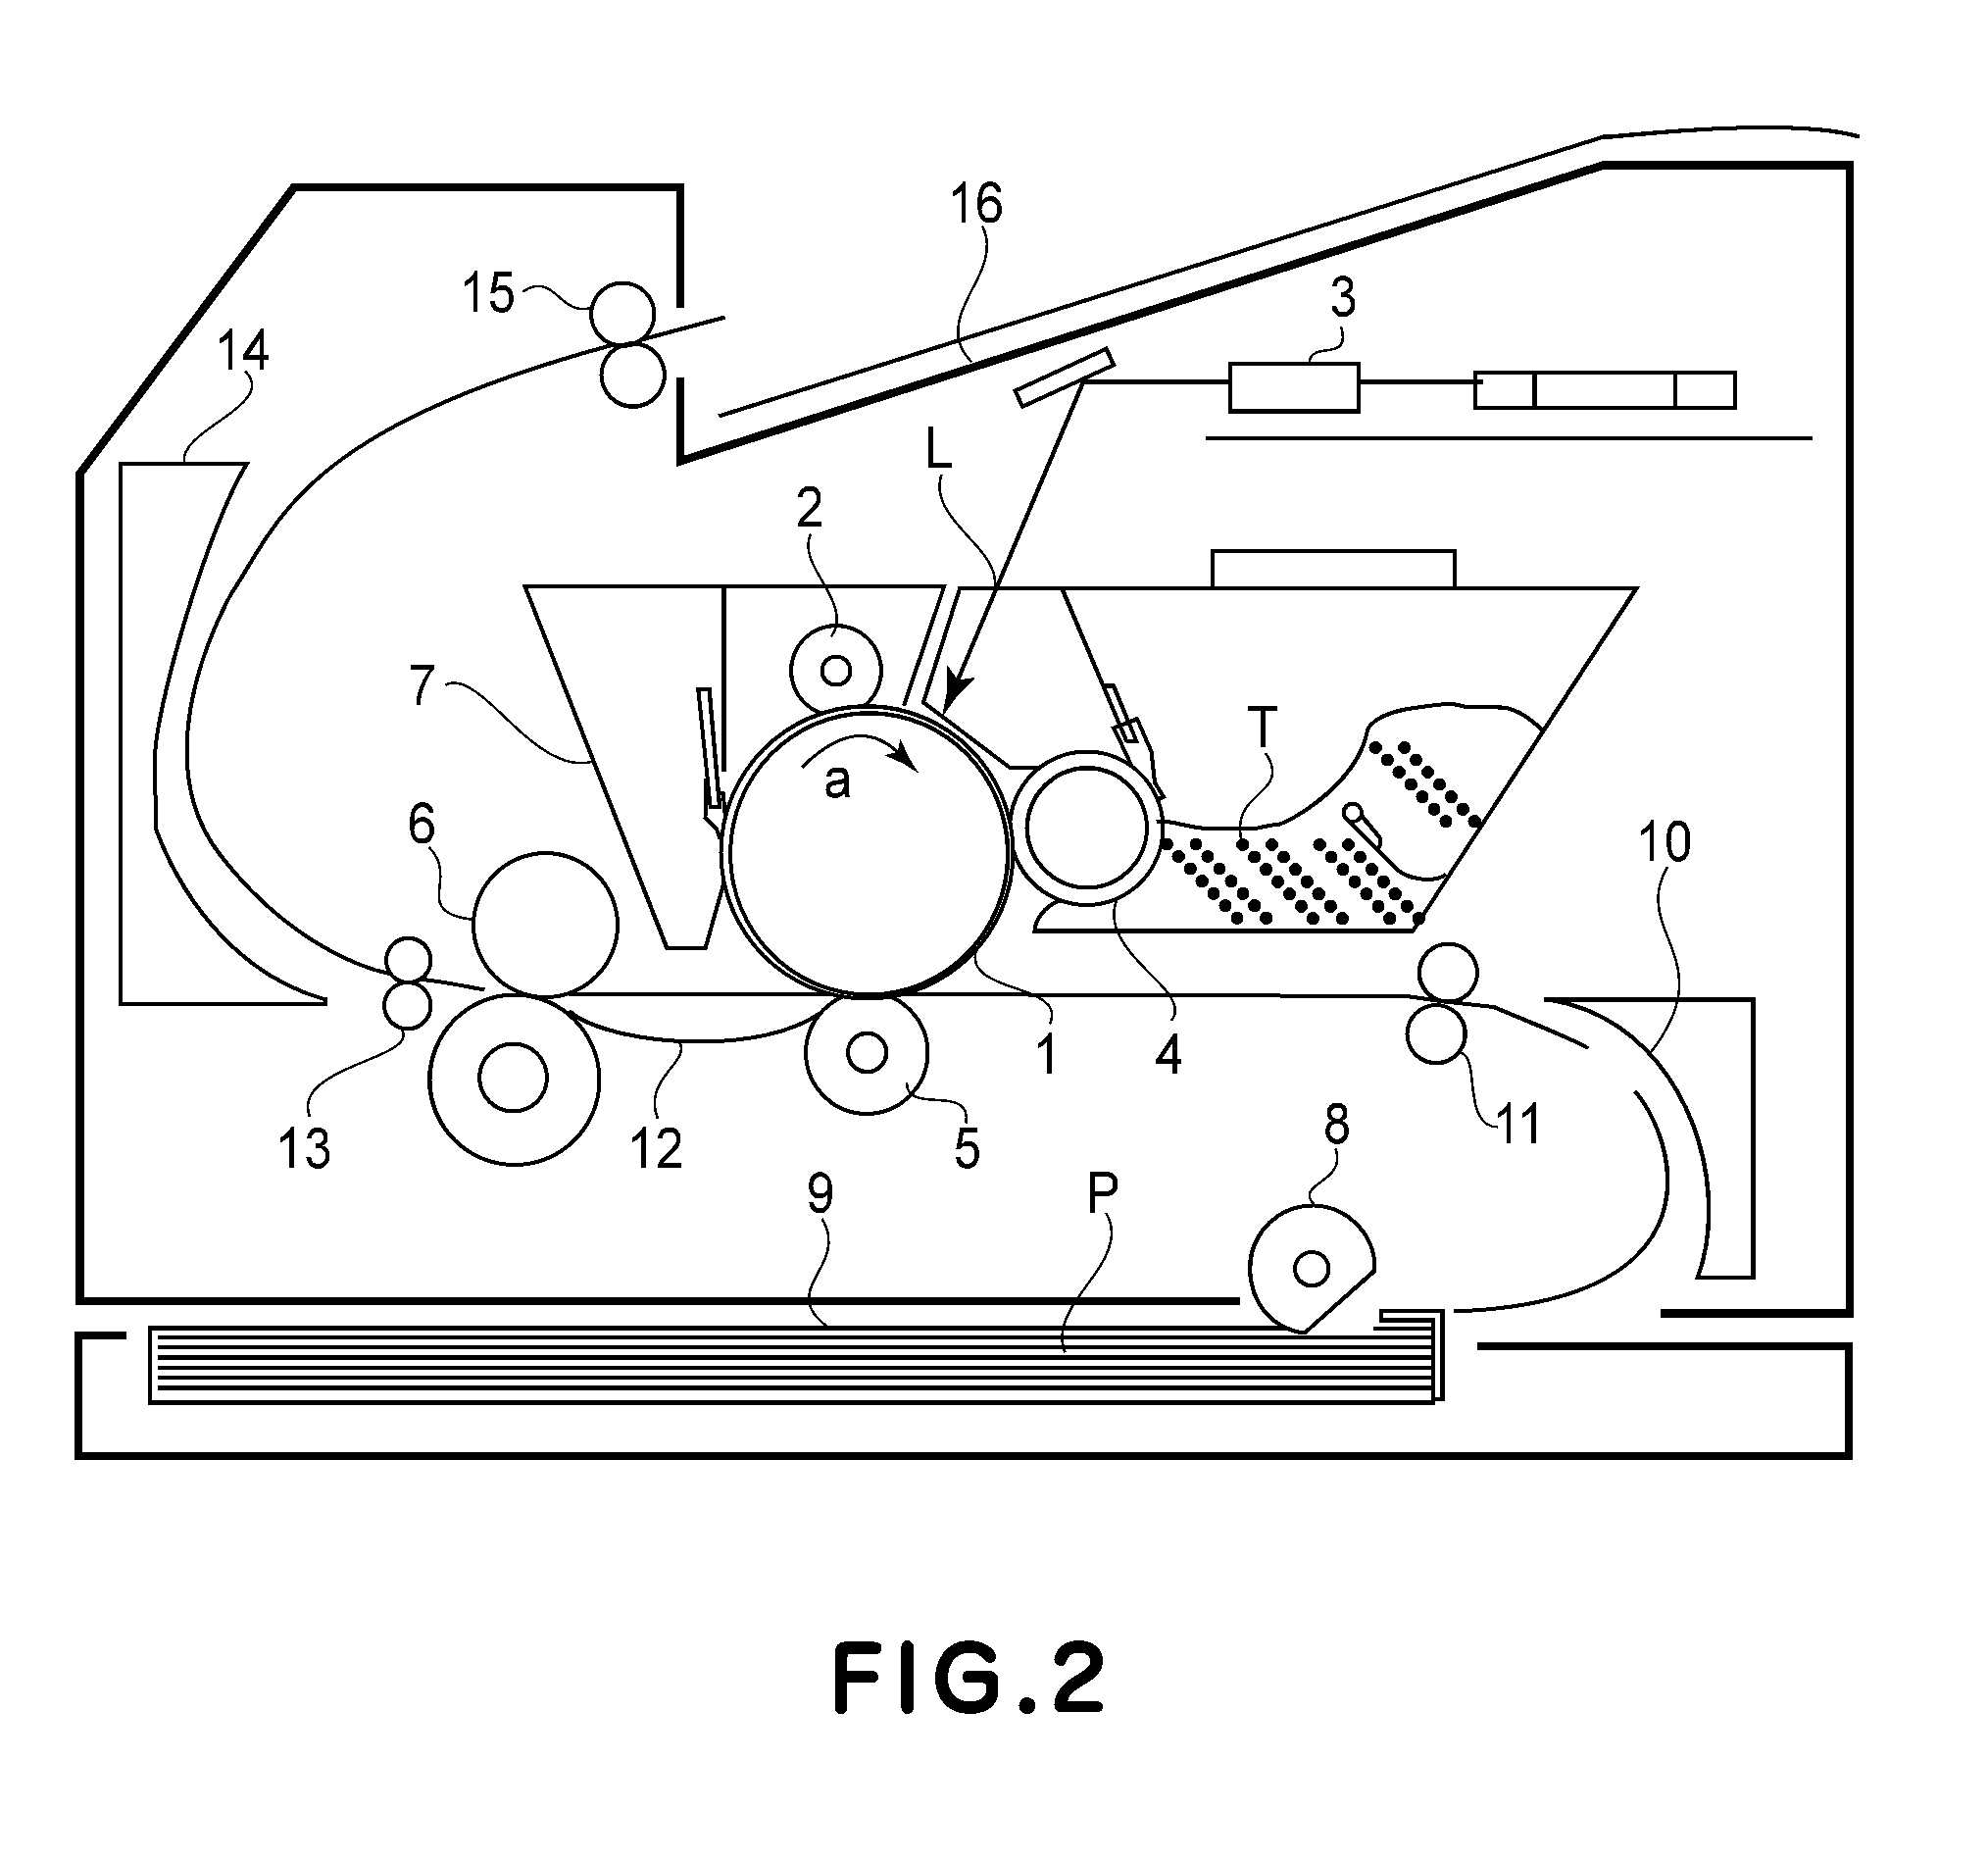 Image heating apparatus and heater used in the apparatus